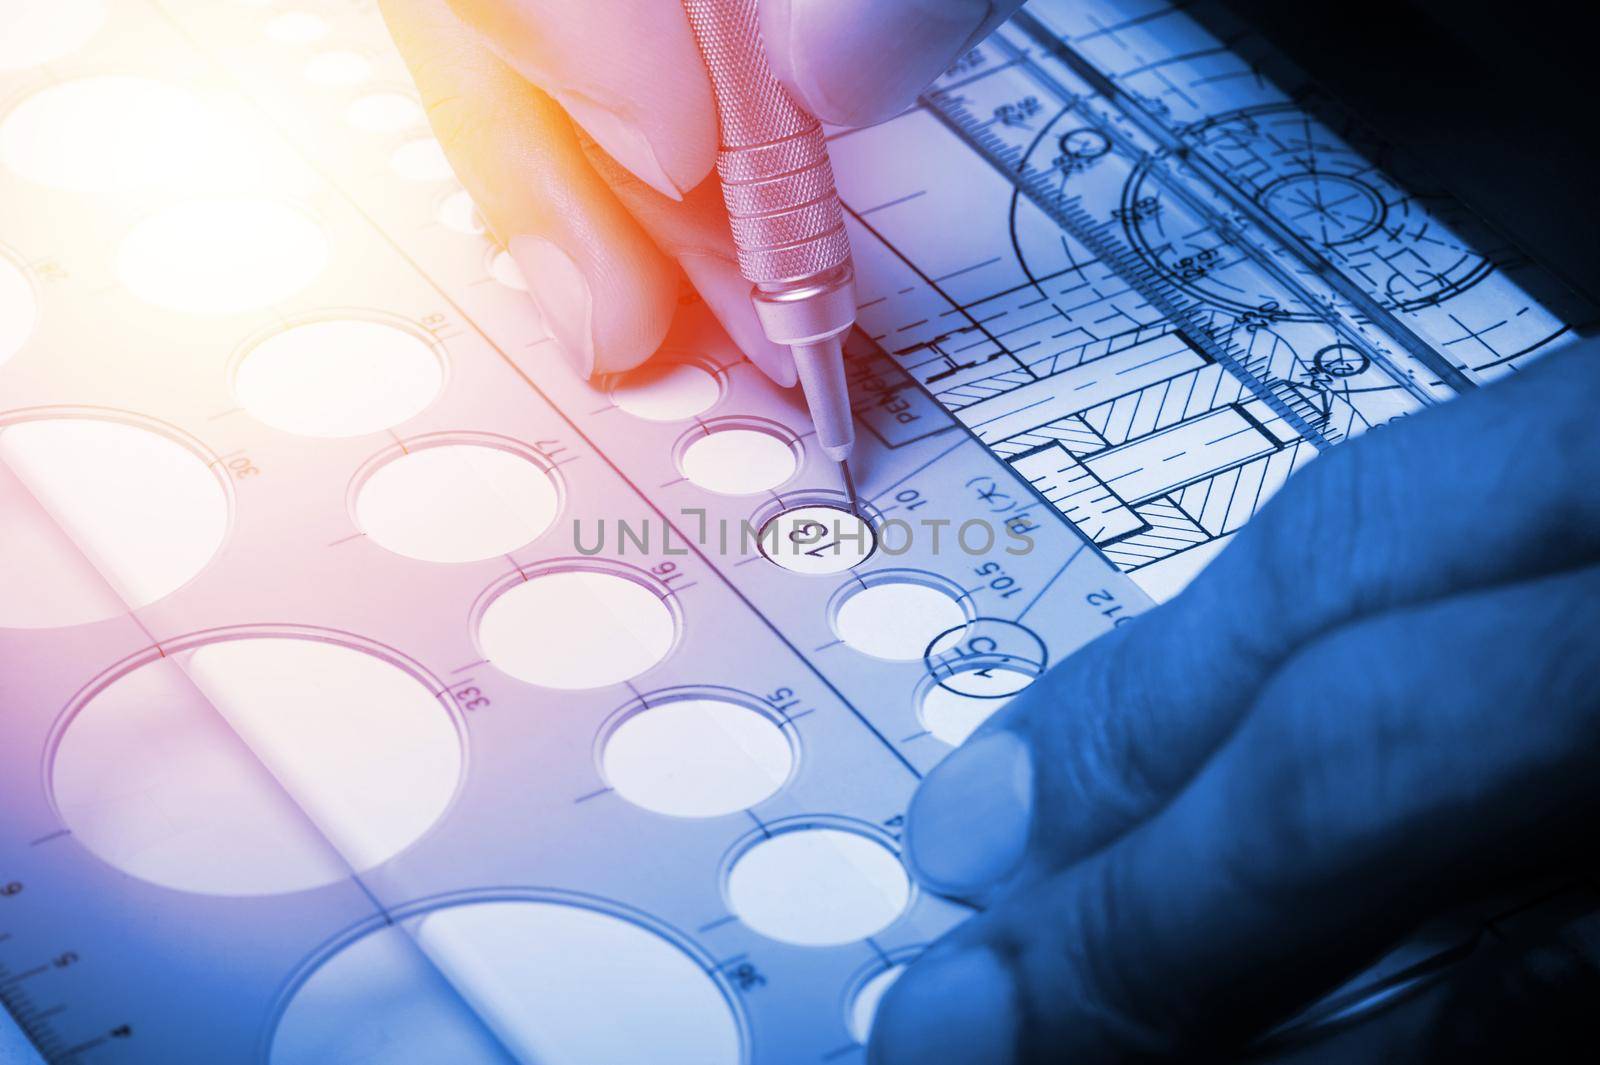 technician using the industrial drawing tools by norgal